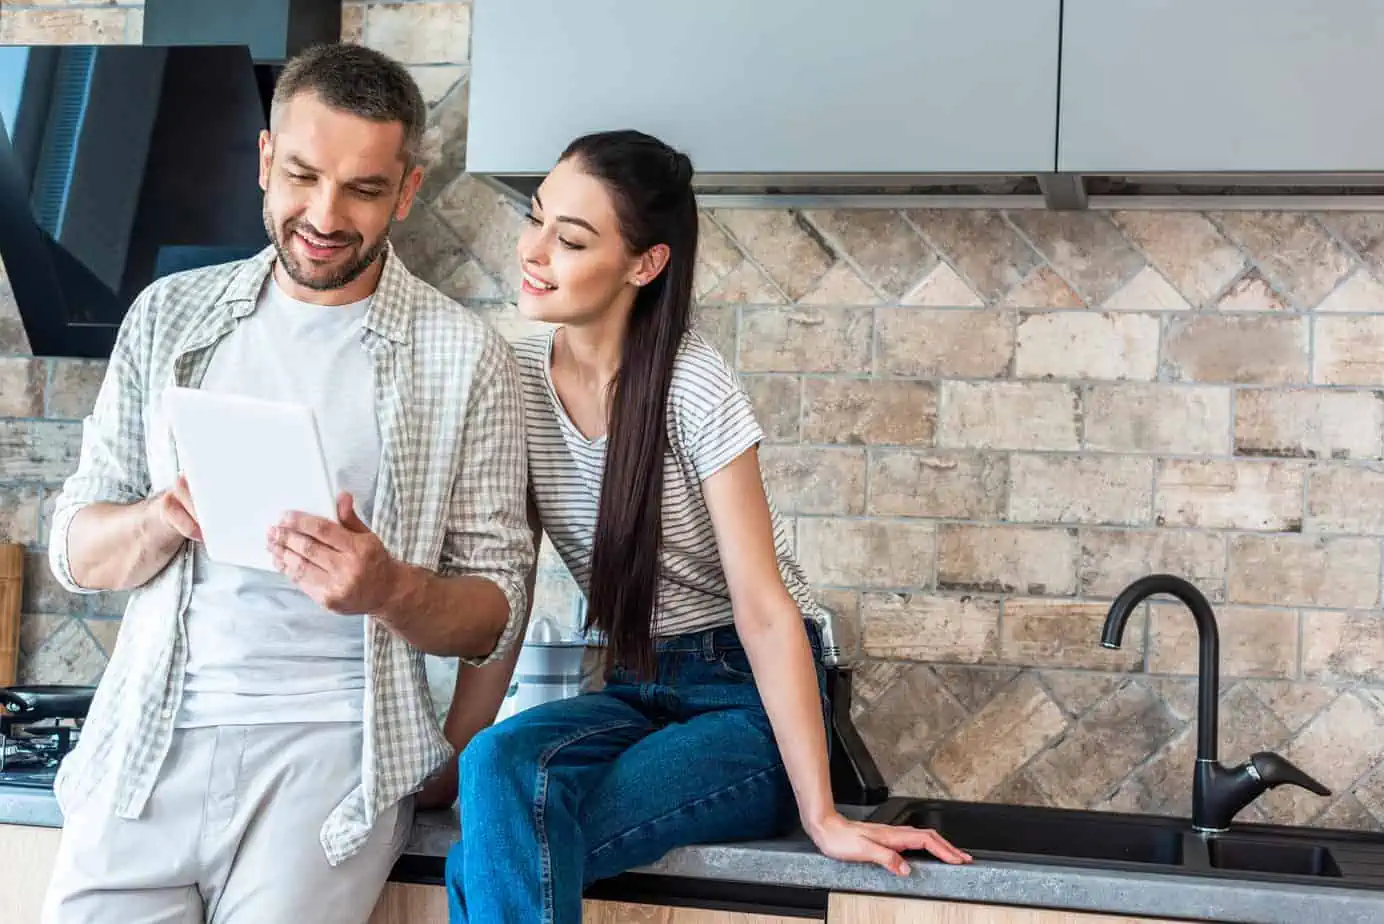 A man and woman sitting on a kitchen counter looking at a tablet